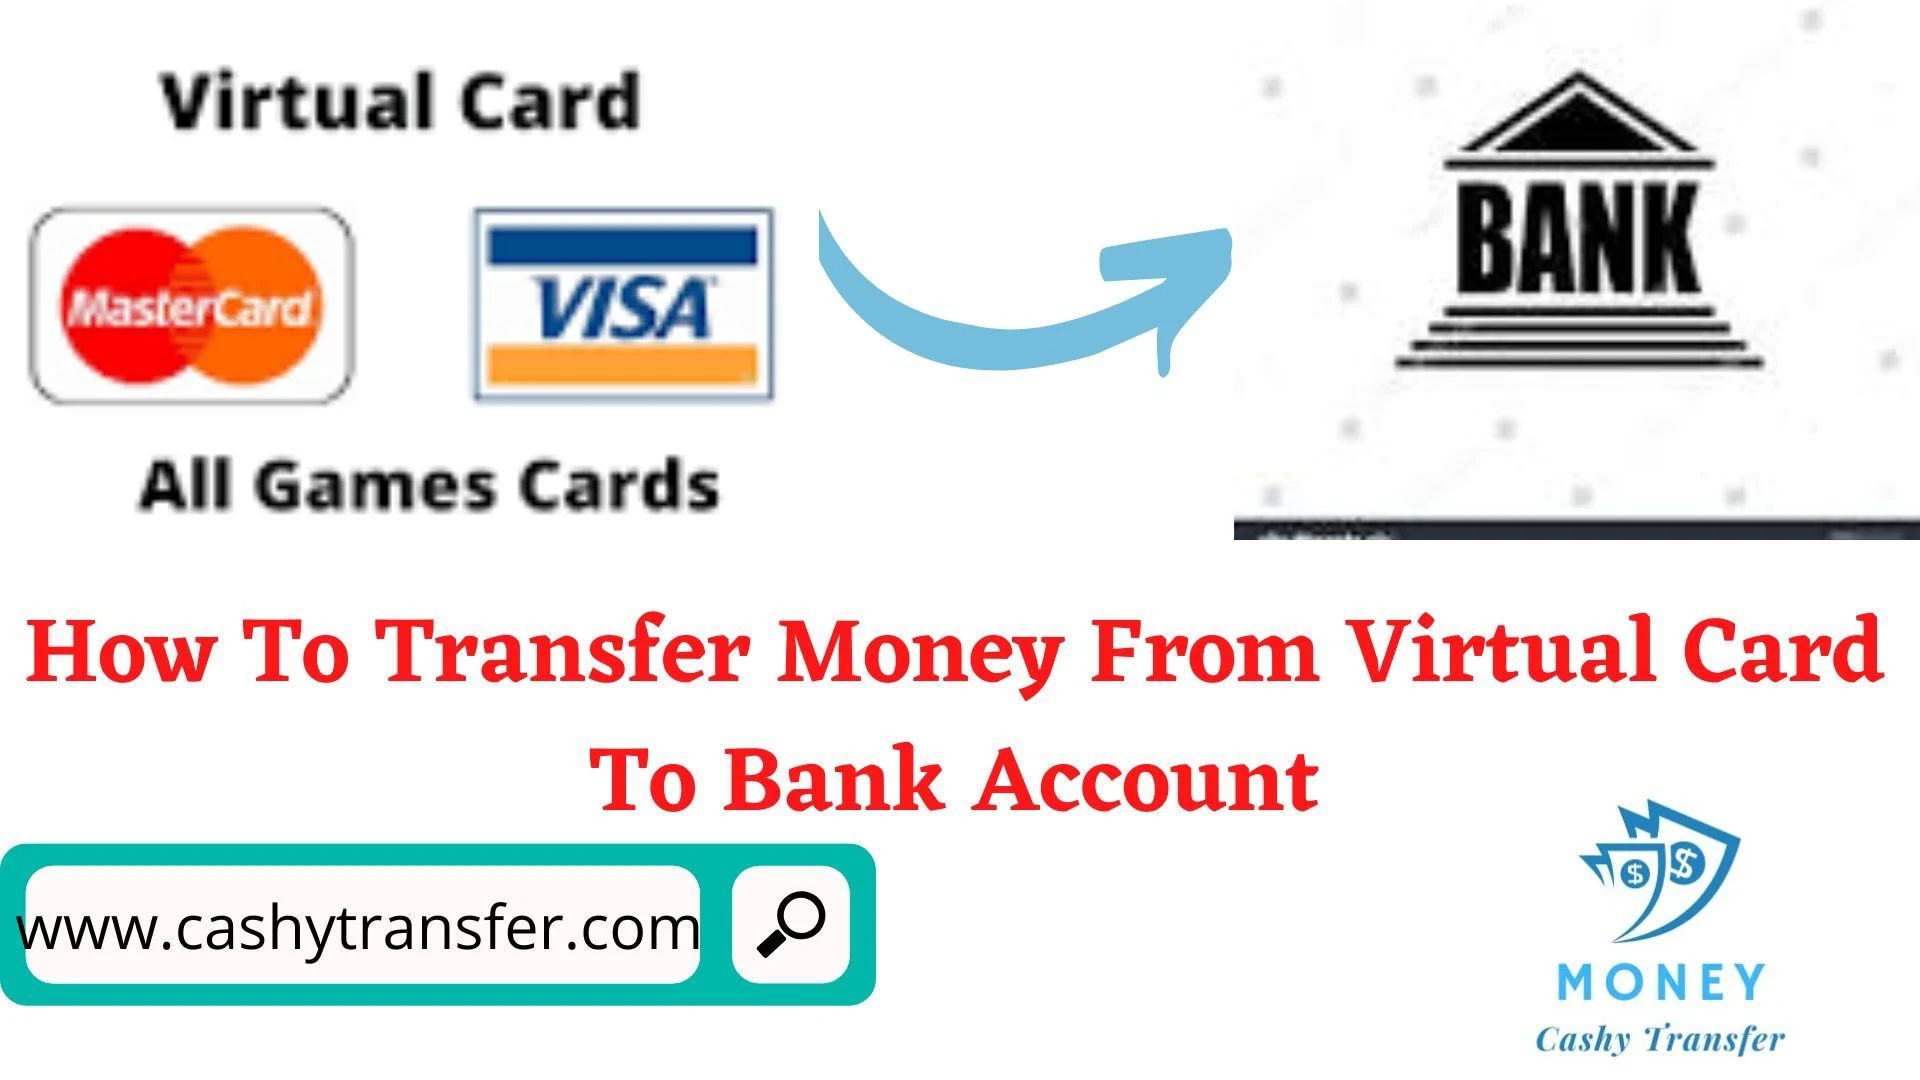 Transfer Money From Virtual Card To Bank Account